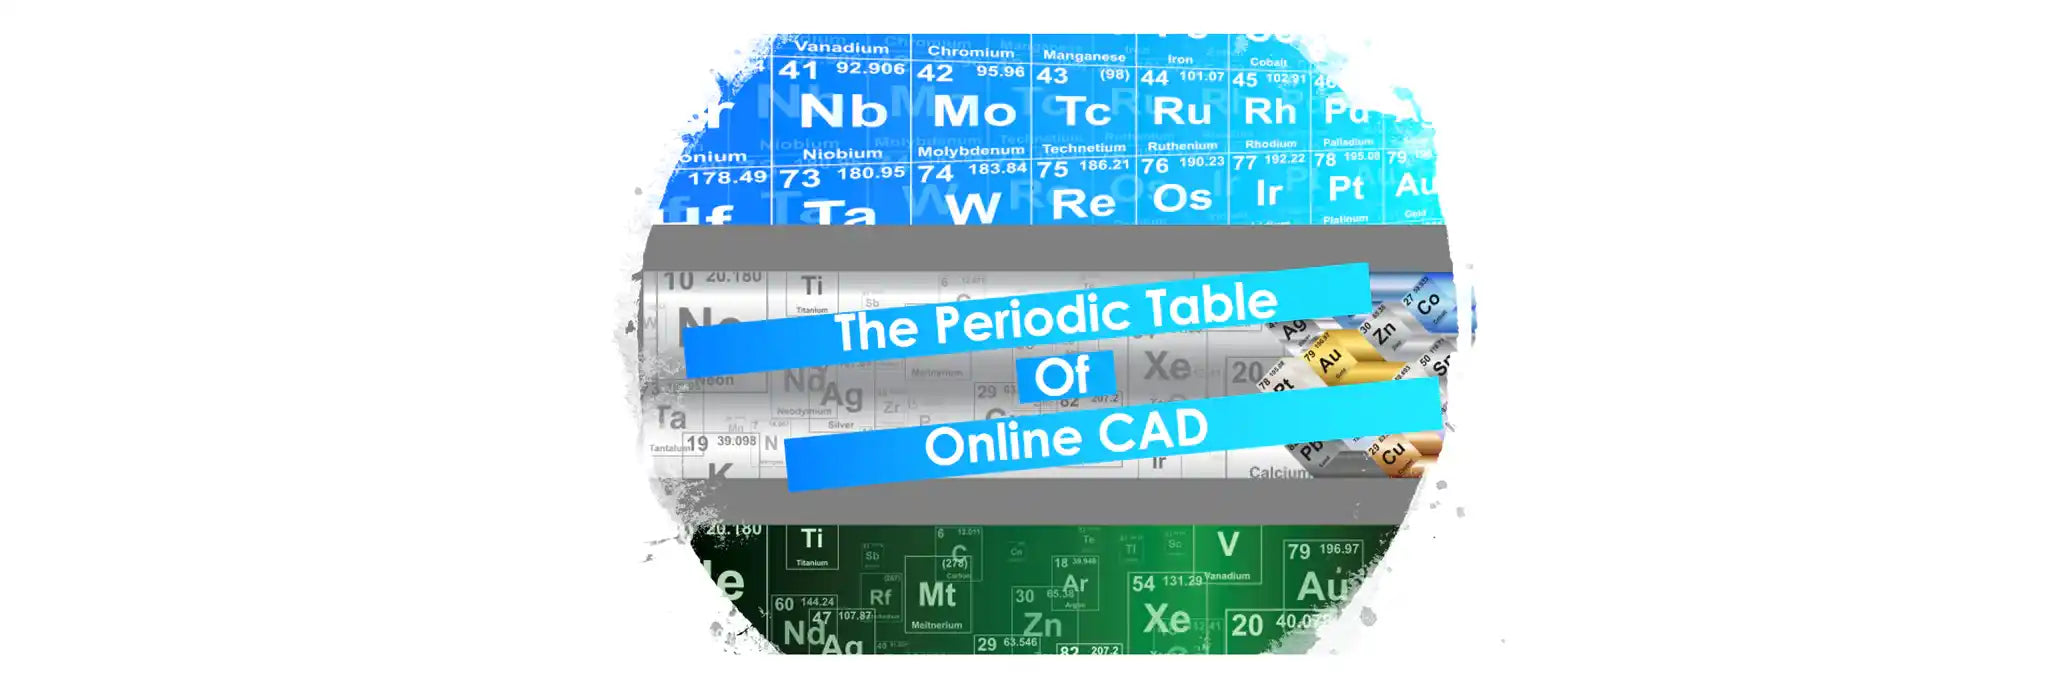 The Periodic Table Of Online CAD